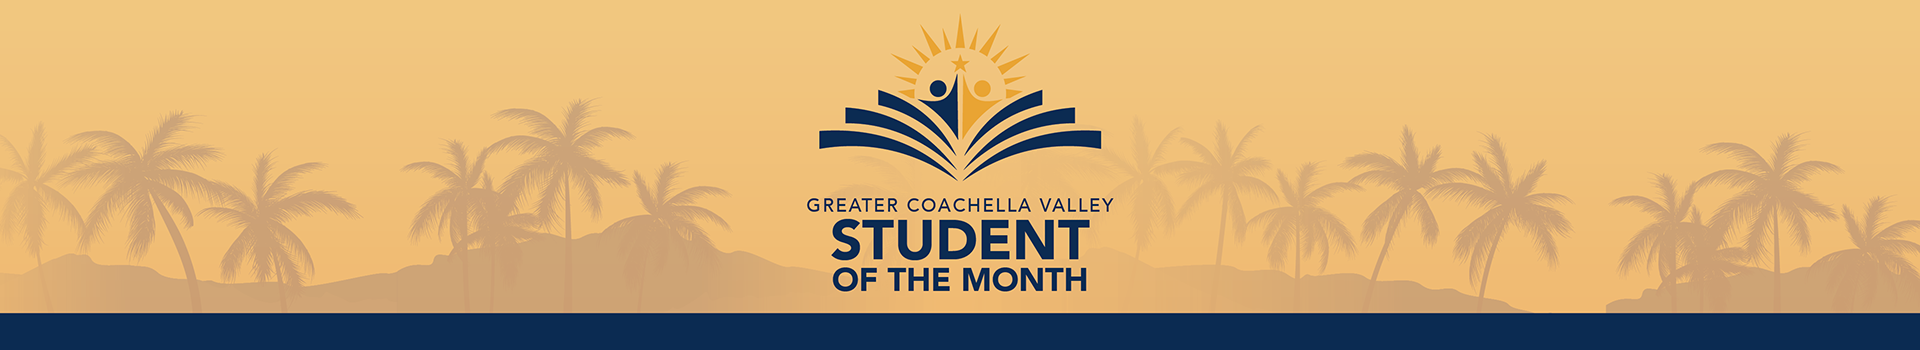 Greater Coachella Valley Student Of The Month